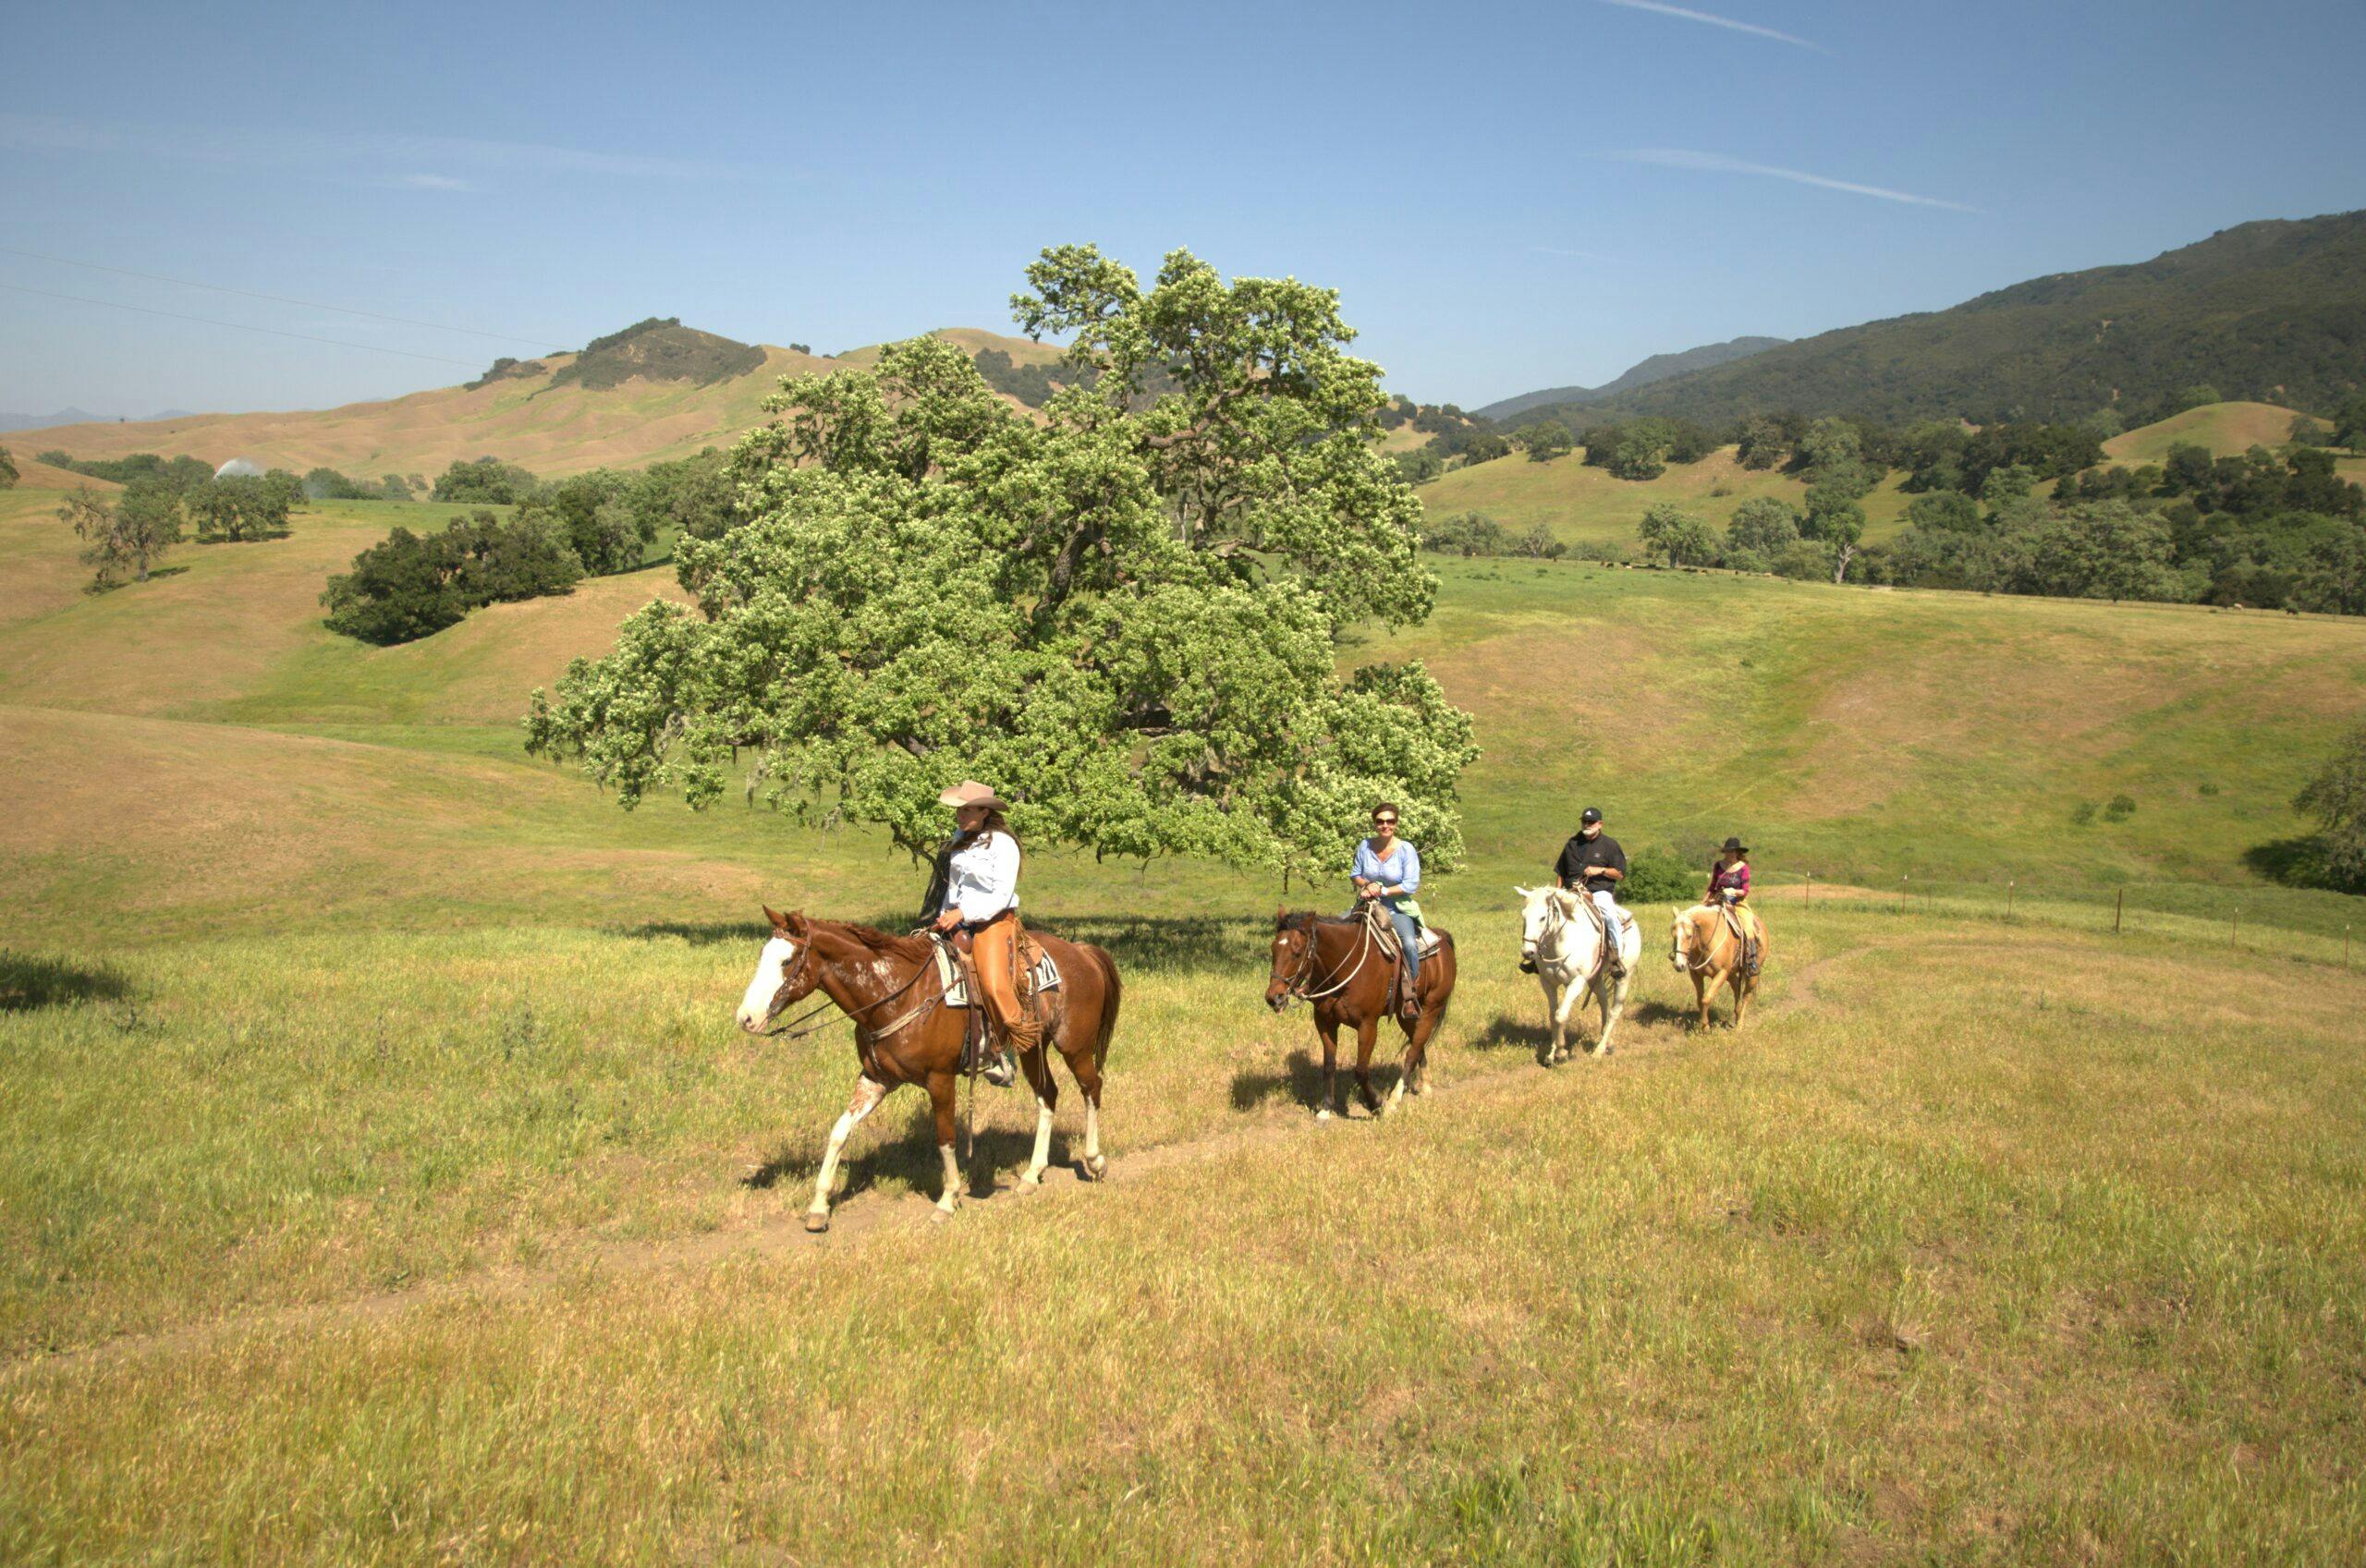 group of people riding horses on the grassy terrain